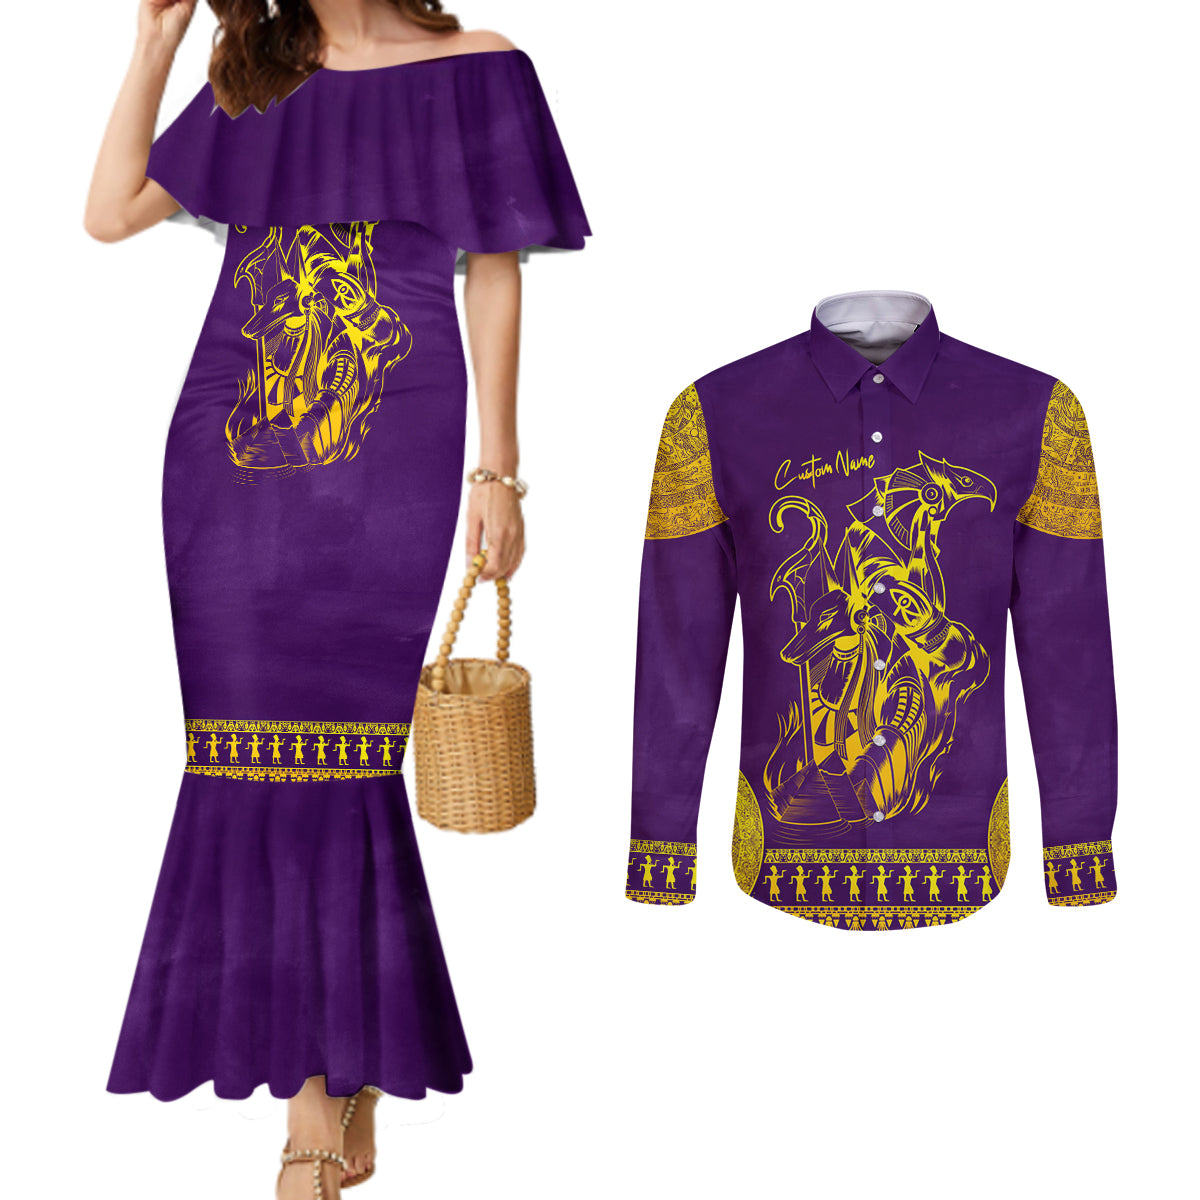 Anubis and Horus Couples Matching Mermaid Dress and Long Sleeve Button Shirt Egyptian God Purple